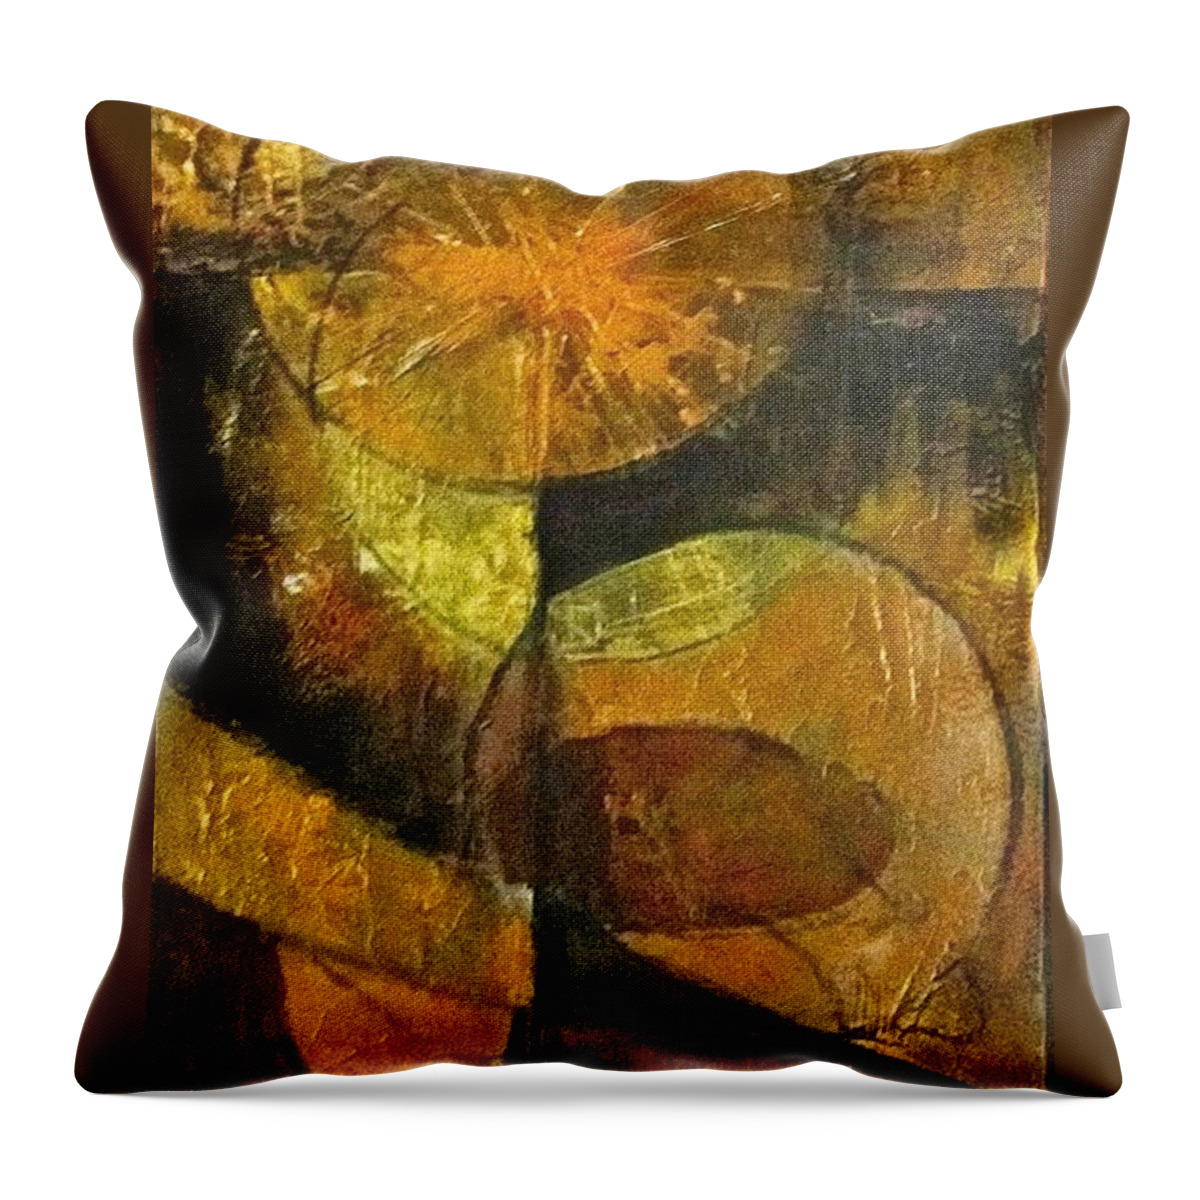 Abstract Throw Pillow featuring the painting Harvest by Barbara O'Toole